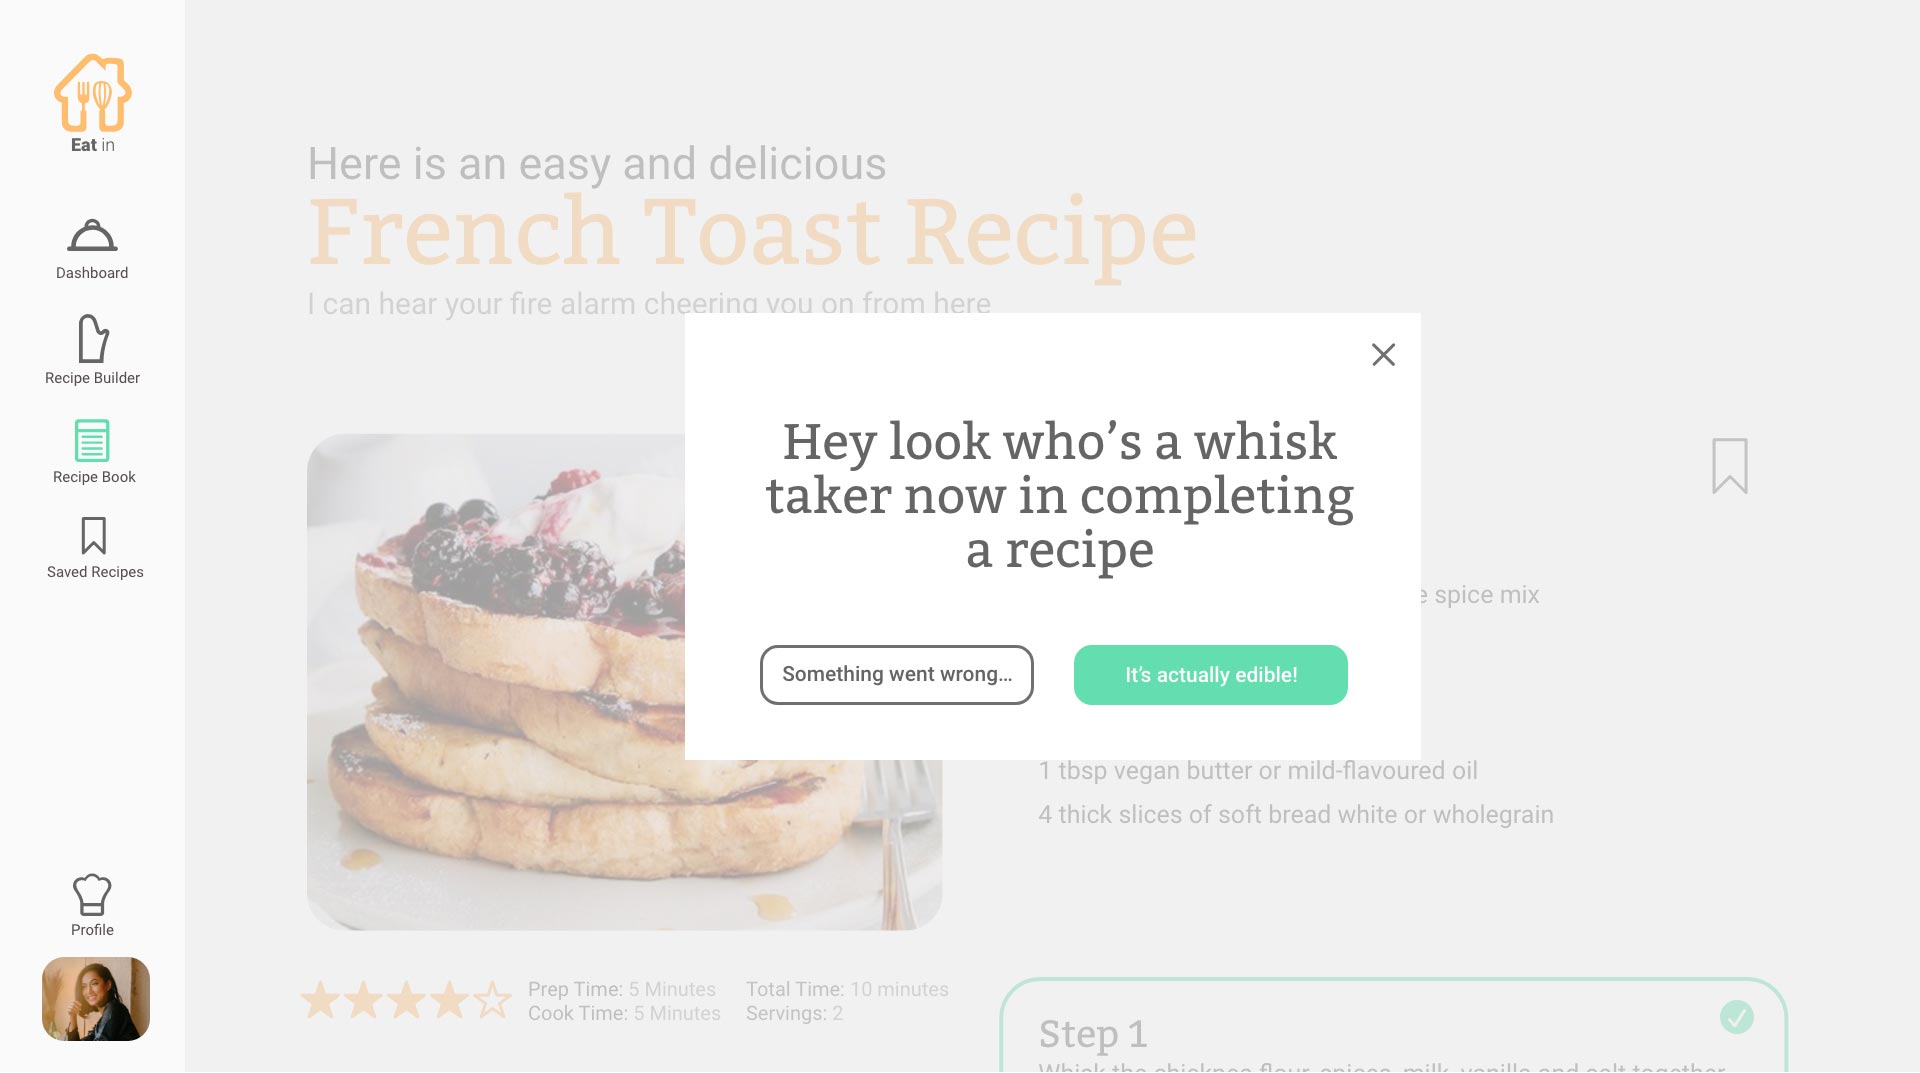 Humourous pop up screen that the user recieves when they complete a recipe